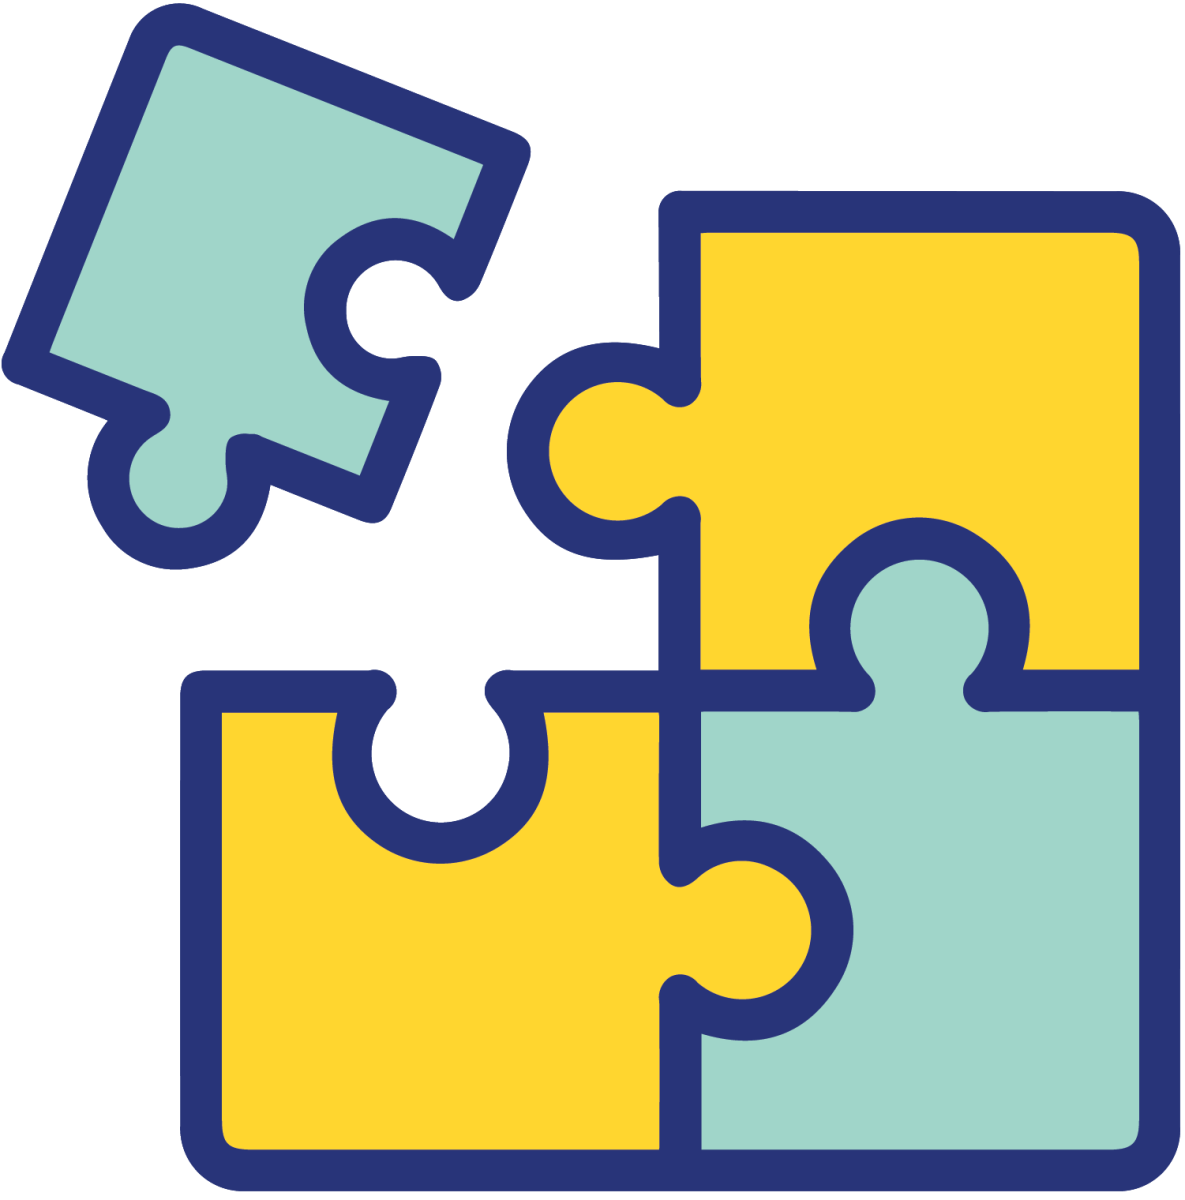 "Jigsaw puzzle icon for Integration"